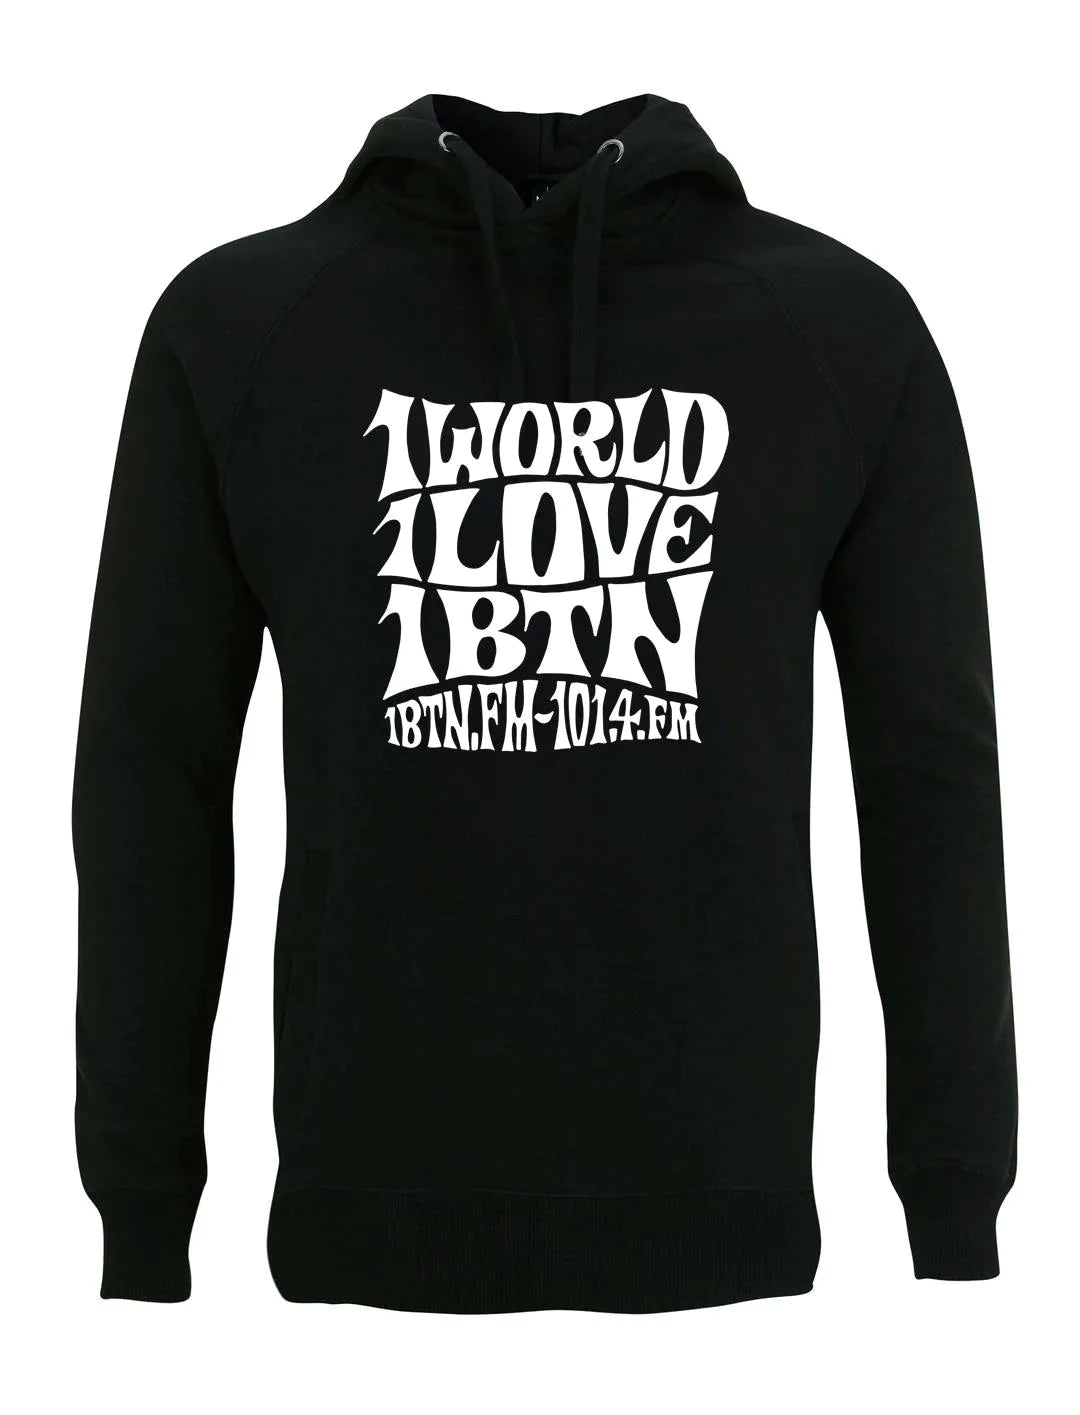 1 WORLD 1 LOVE by Swifty: Hoodie Official Merchandise of 1BTN.FM (5 Colour Options) - SOUND IS COLOUR